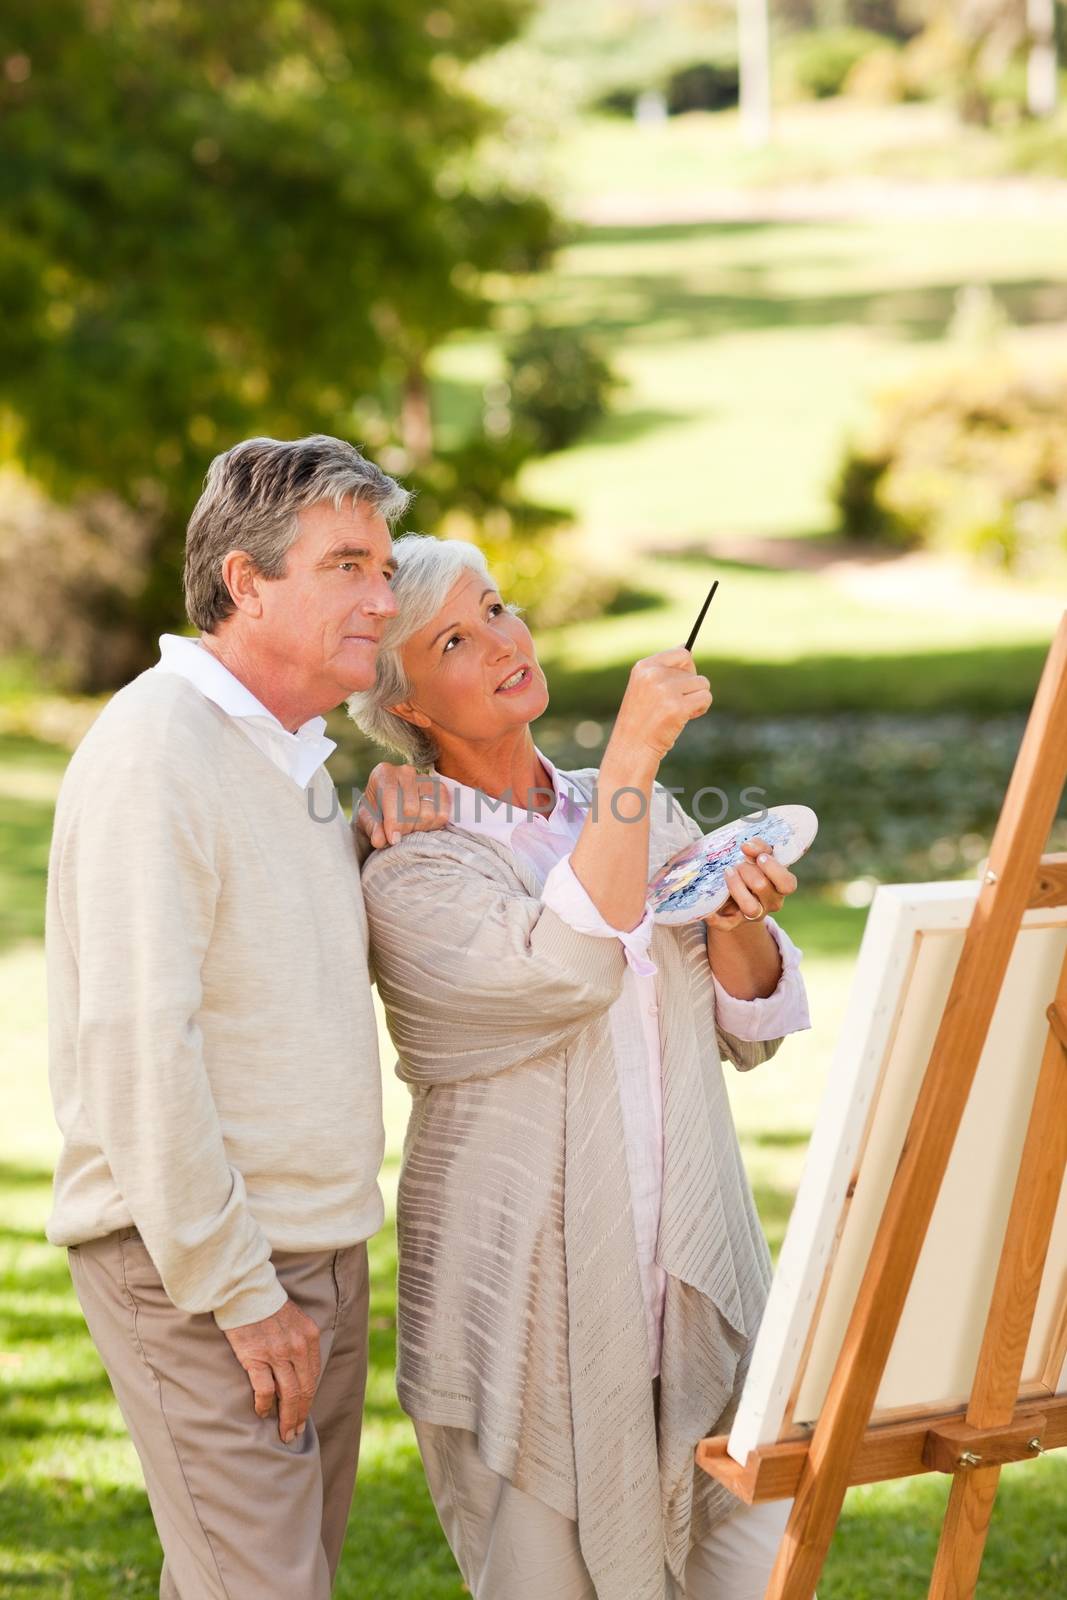 Senior couple painting in the park during the summer